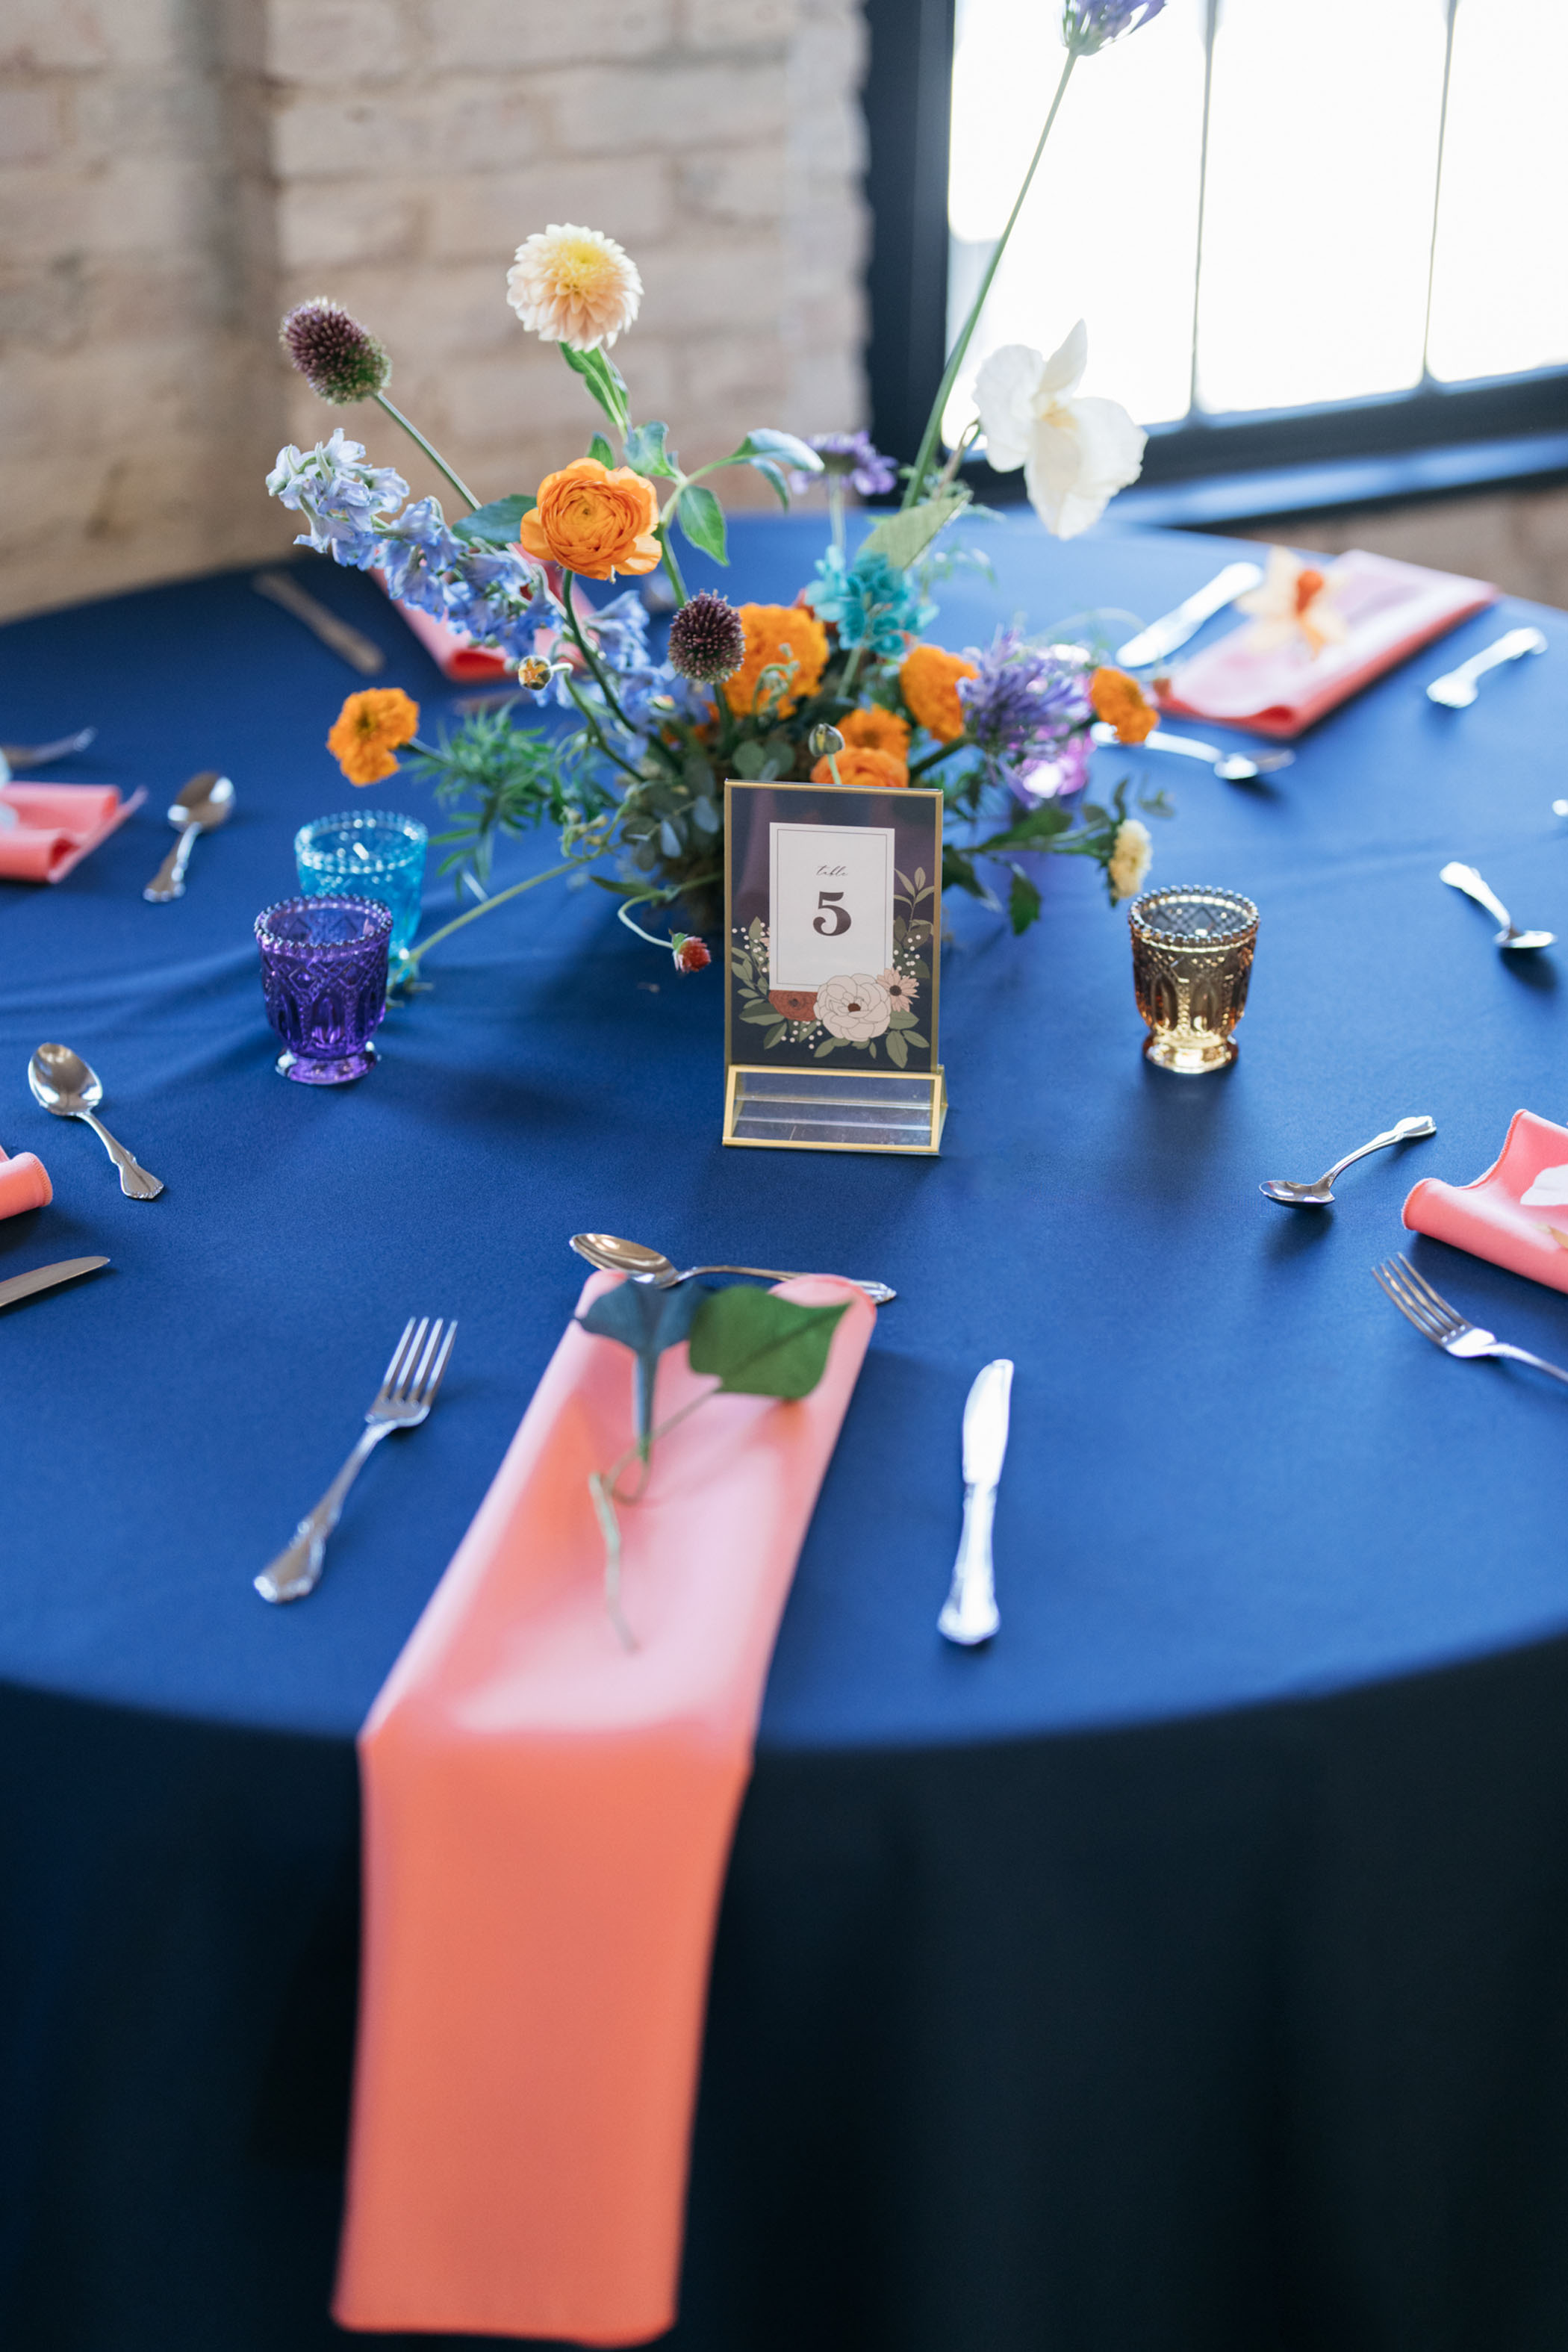 Colorful and Queer Jewish Wedding in Louisville Kentucky